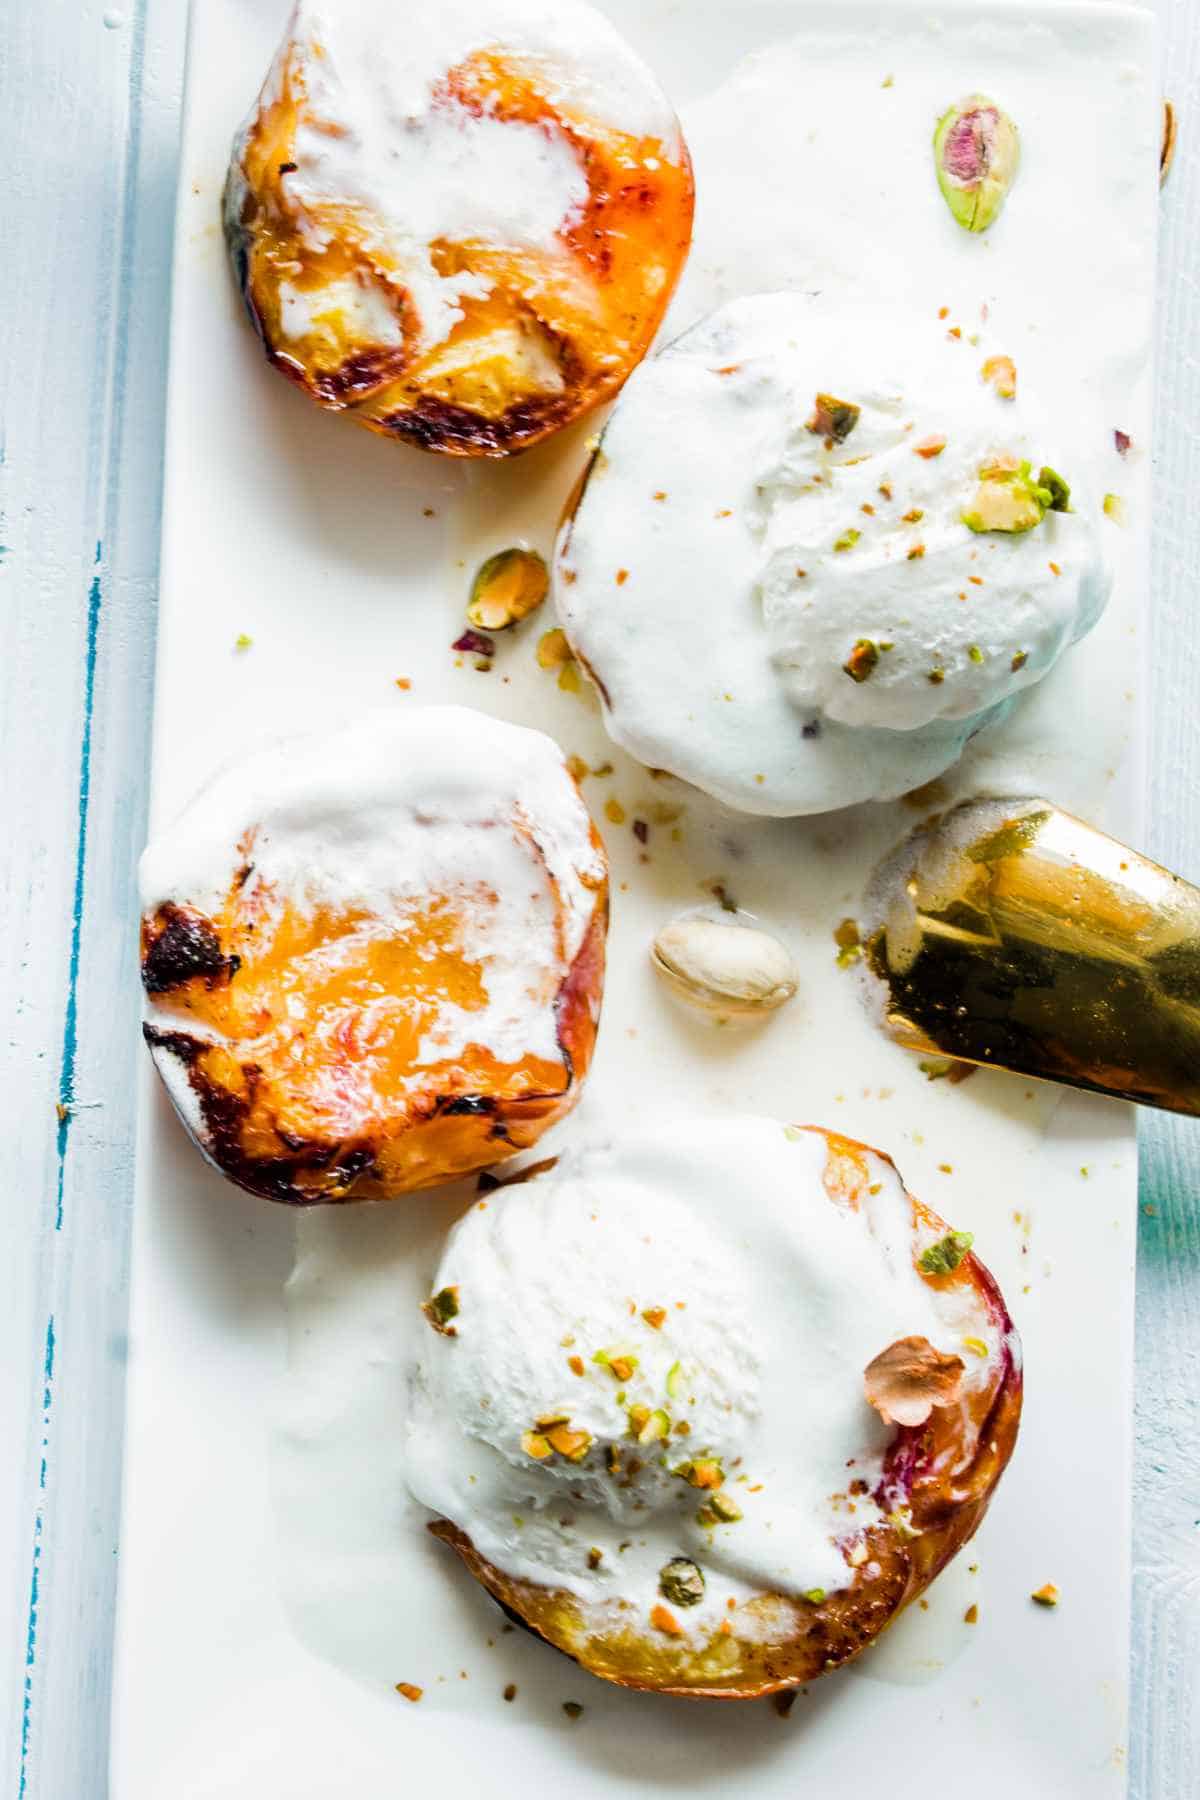 baked peaches on a platter with ice cream and chopped pistachio nuts.